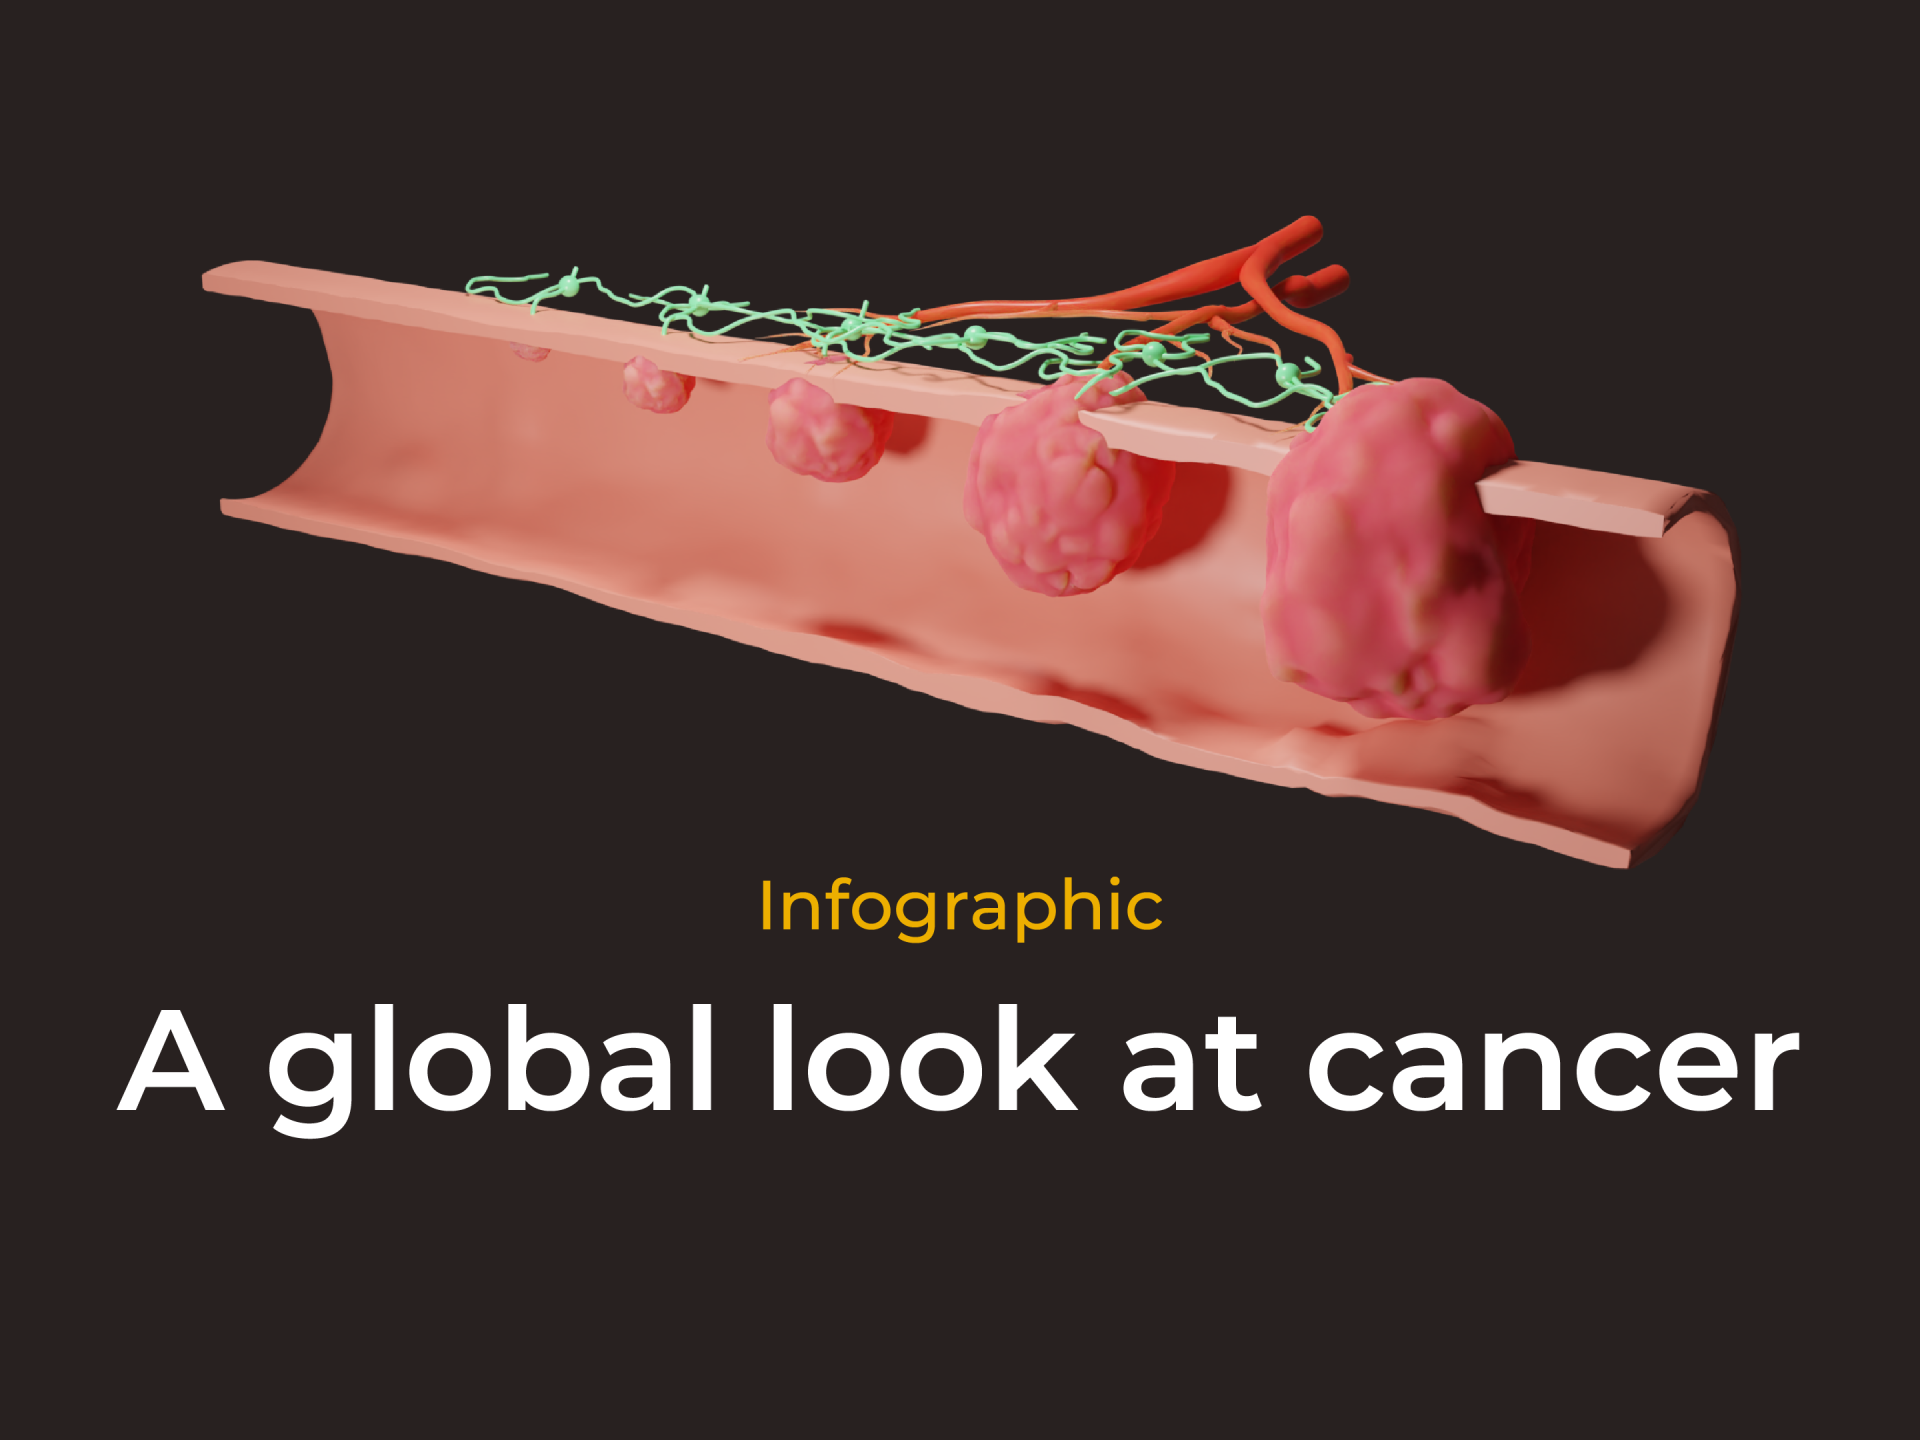 Infographic: A global look at cancer